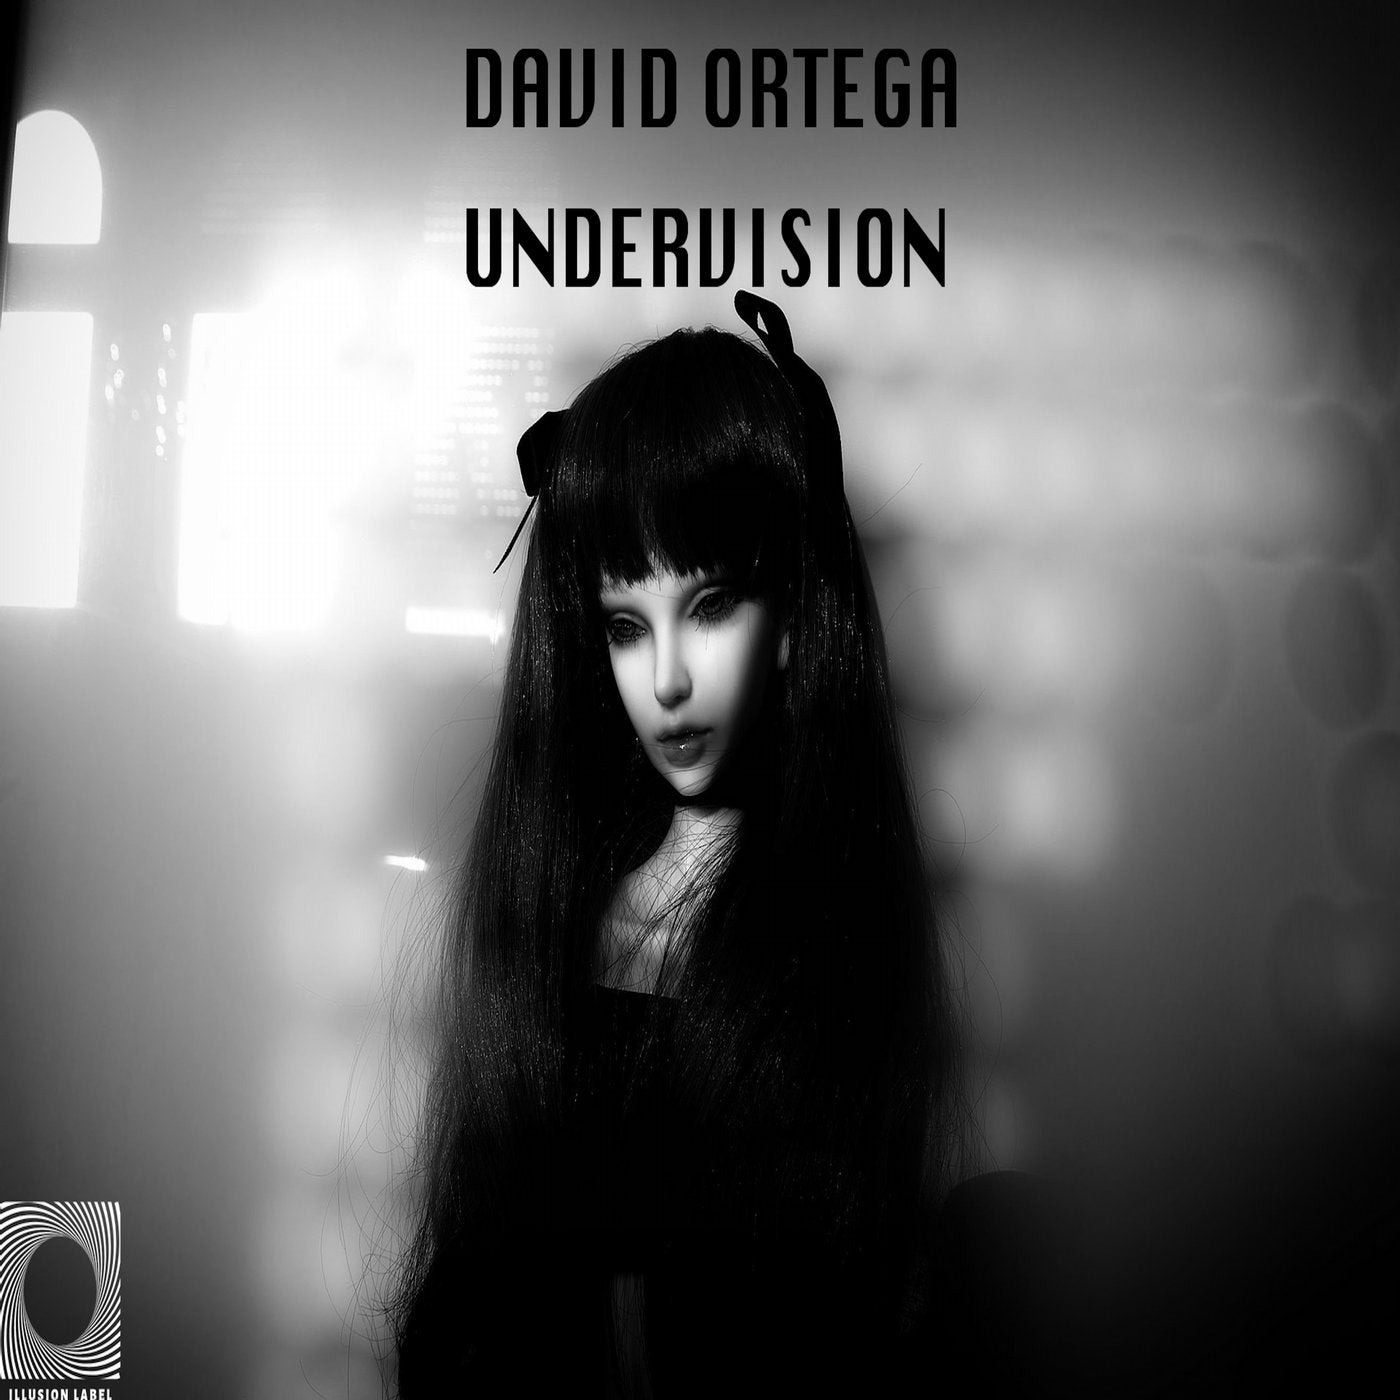 Undervision